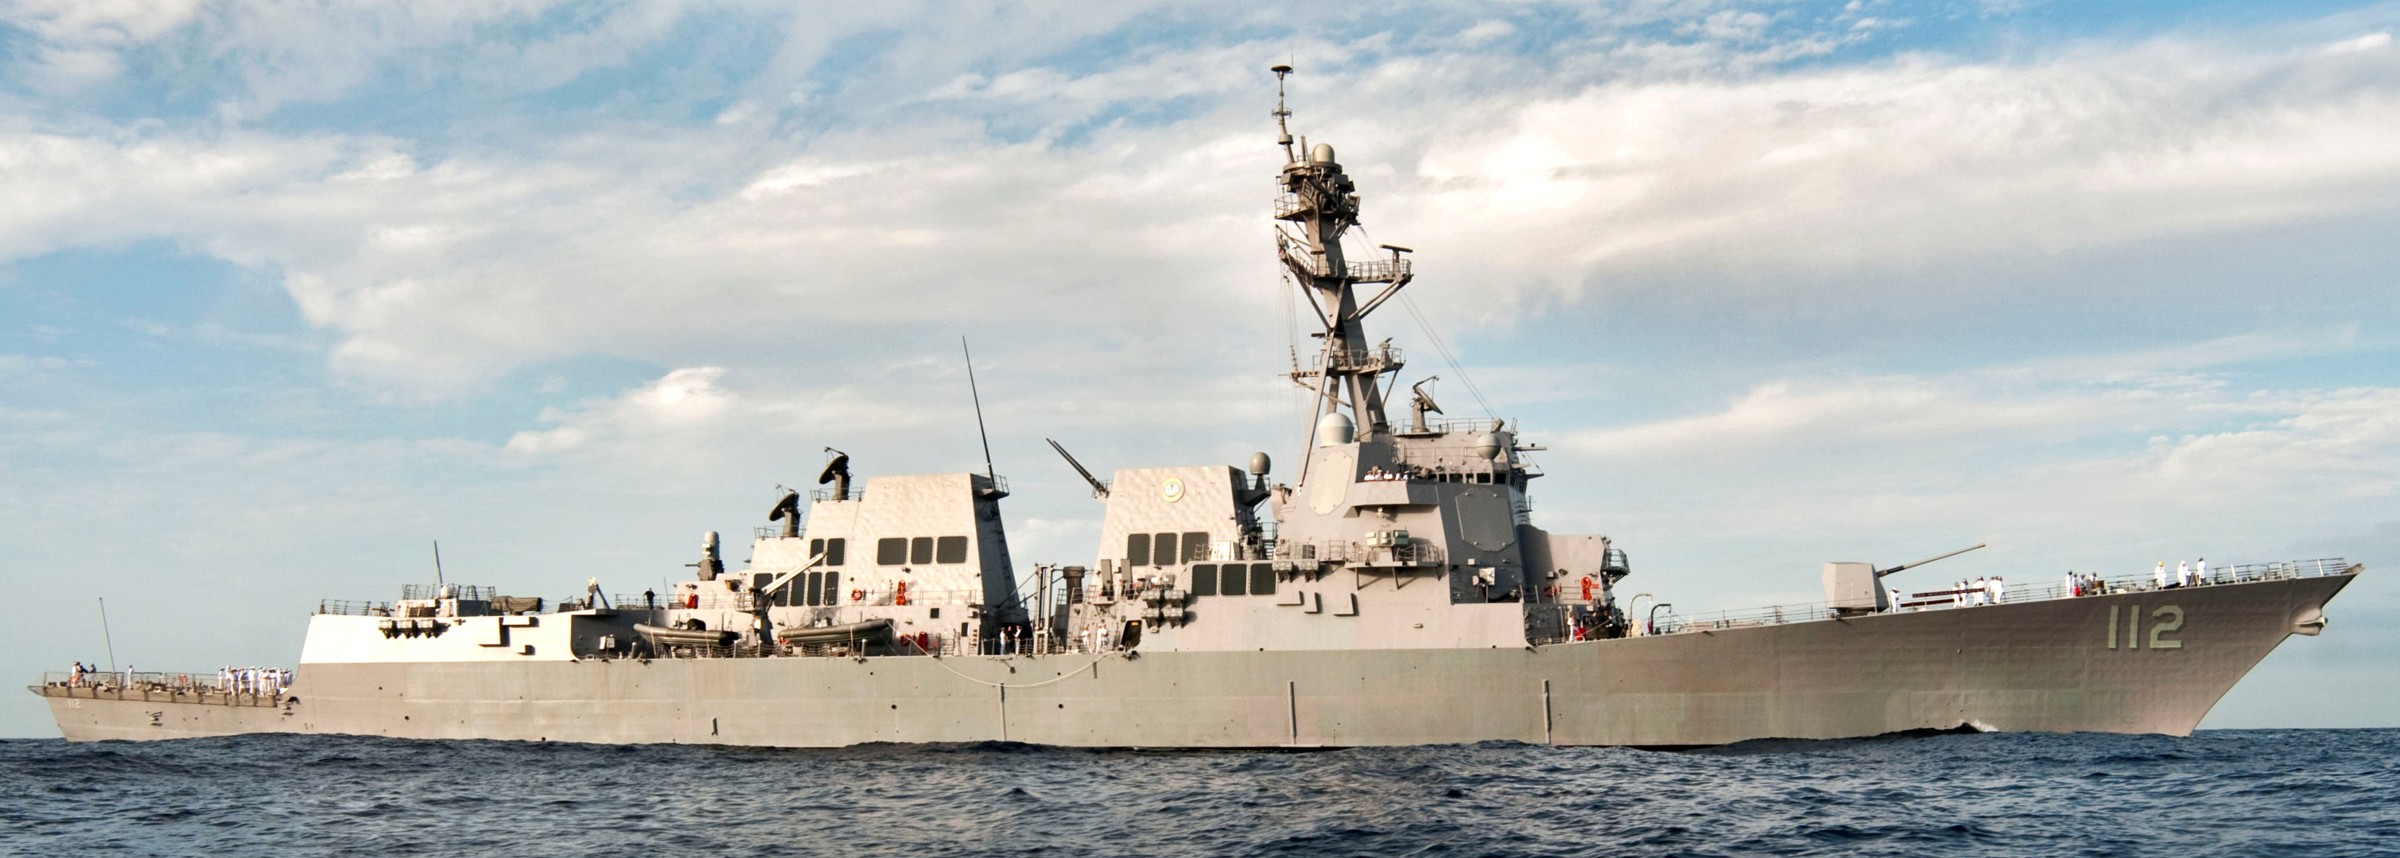 ddg-112 uss michael murphy arleigh burke class guided missile destroyer aegis us navy 68p